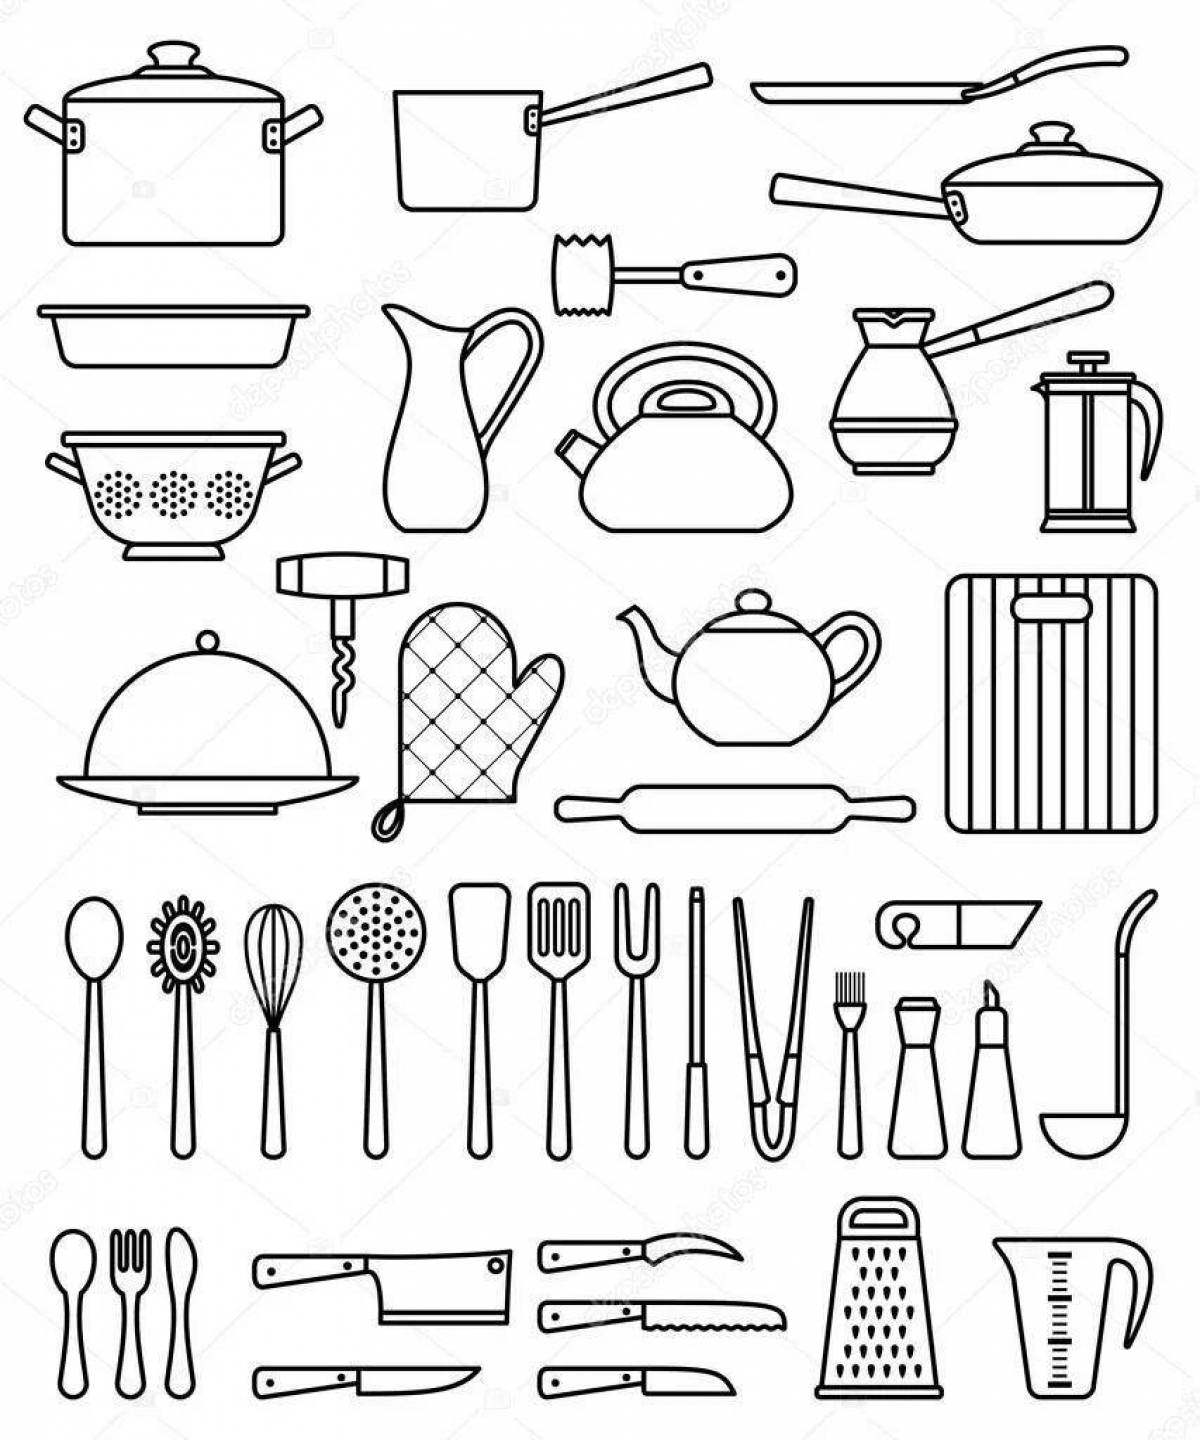 Amazing kitchen utensils coloring page for kids